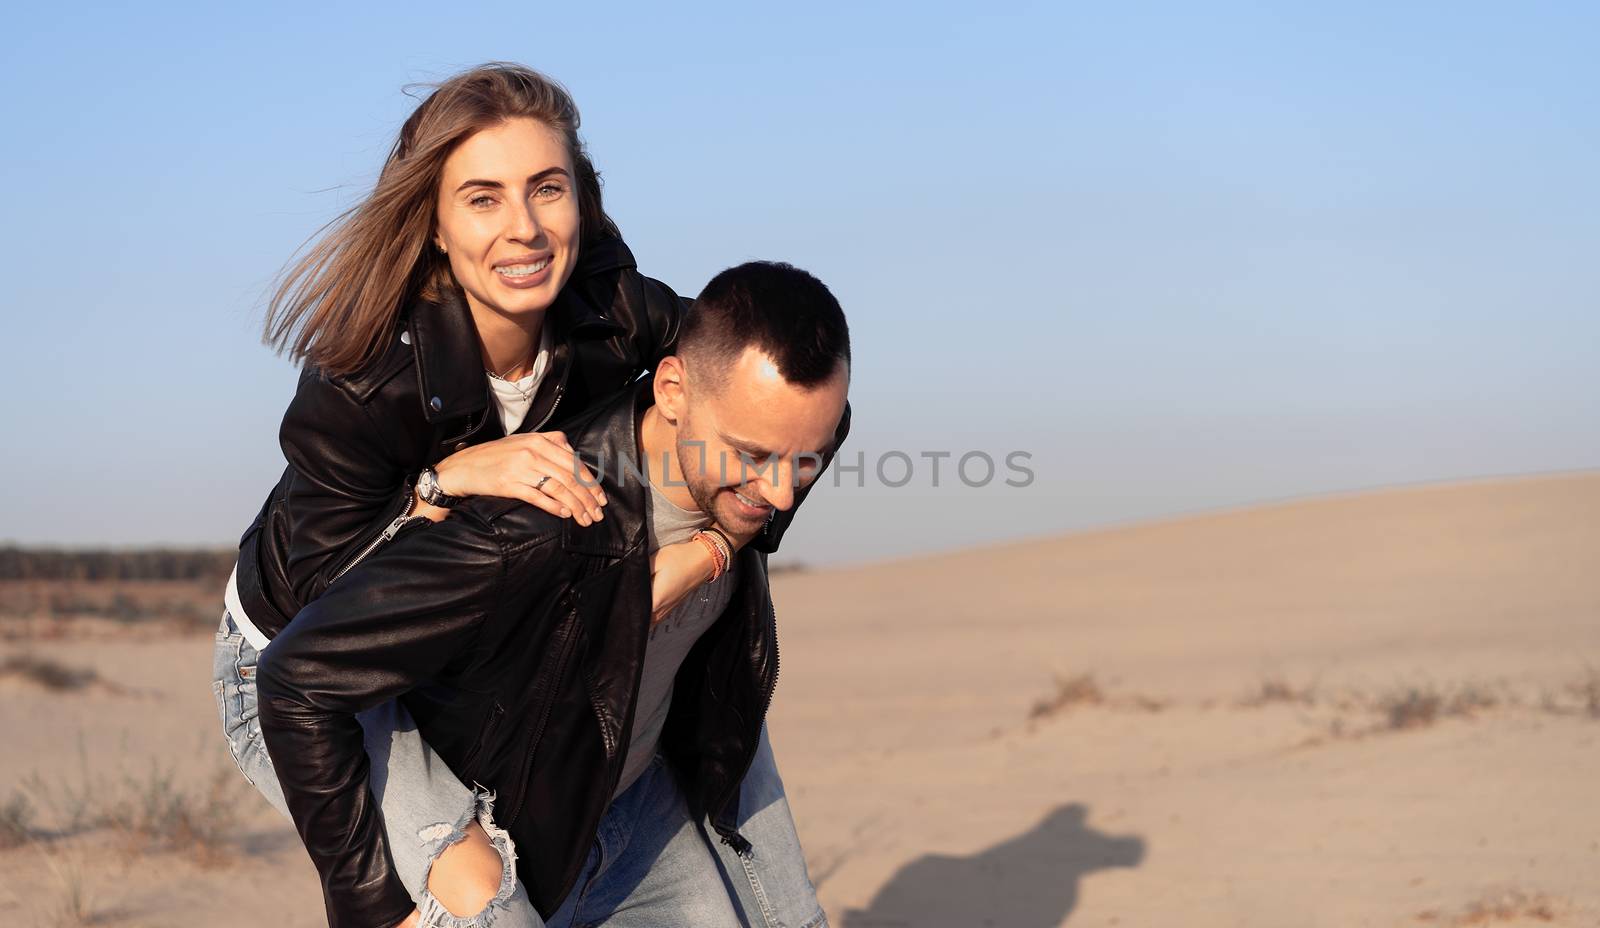 Happy and cute adorable adult couple leather jacket and jeans man with woman girlfriend on piggy back, have fun play, laugh,smile and jump on sunset at desert crazy in love, emotions and relationship